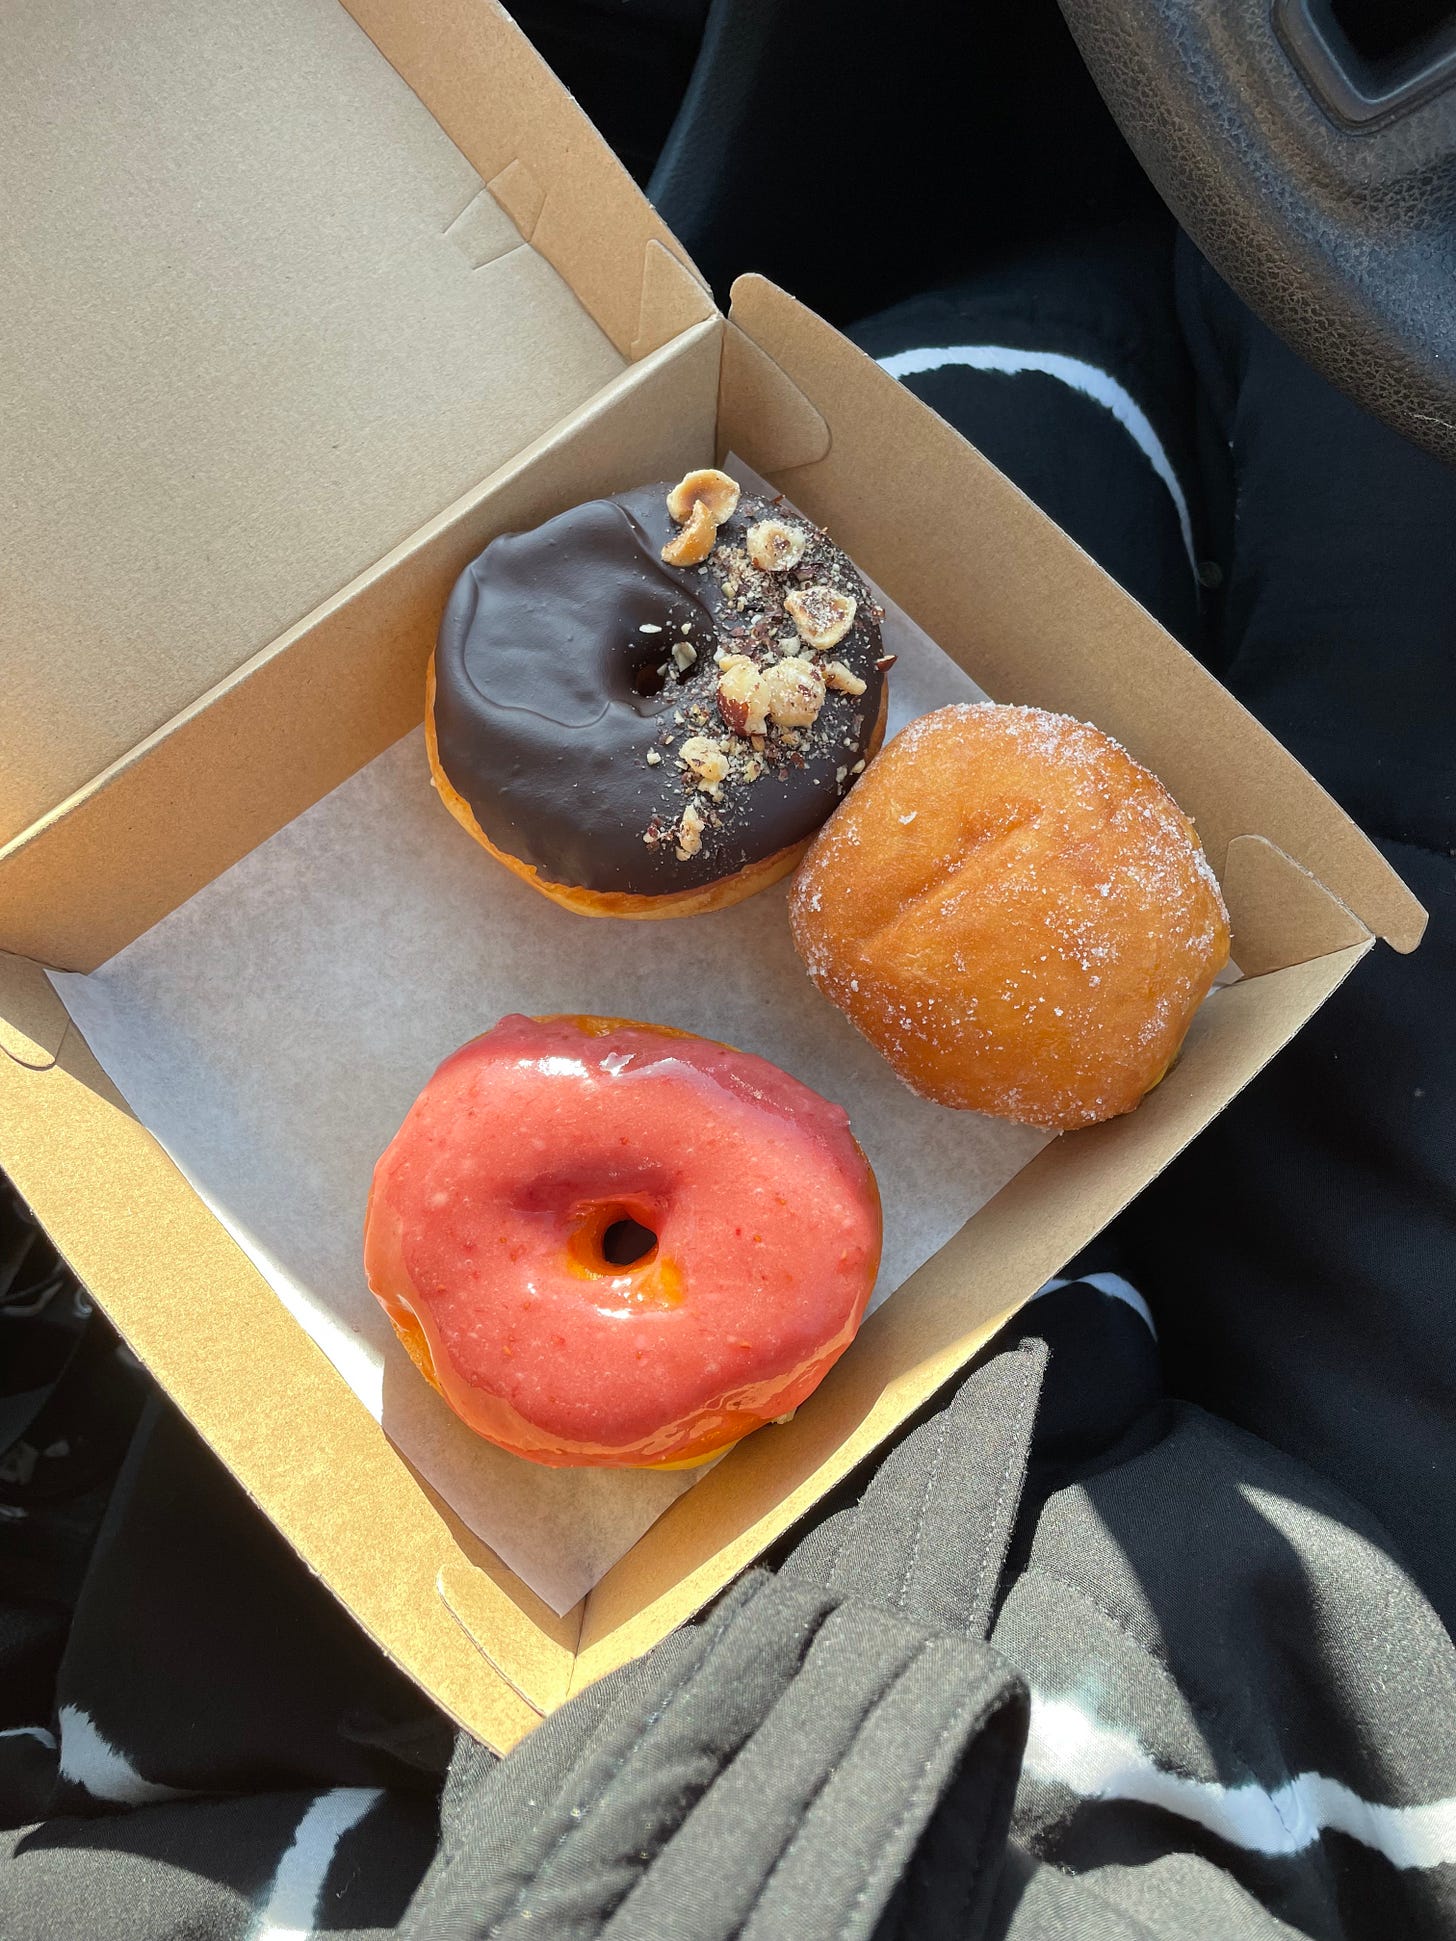 Box of two iced doughnuts and one jam doughnut on a lap in a car